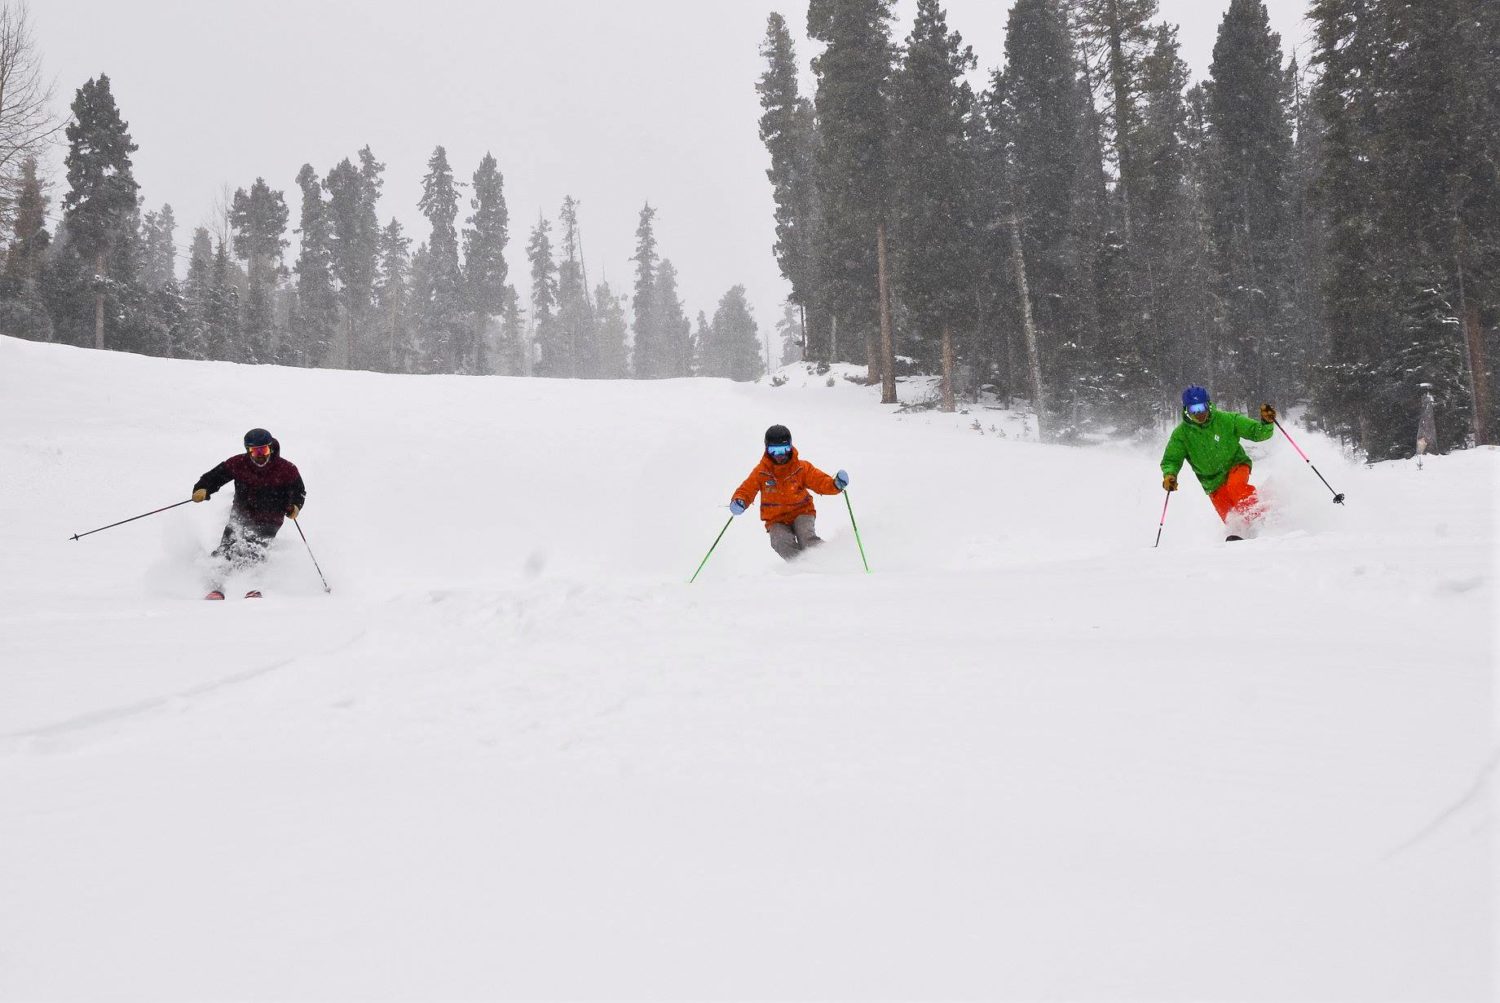 It's going to be more affordable for teachers to get their powder fix this year